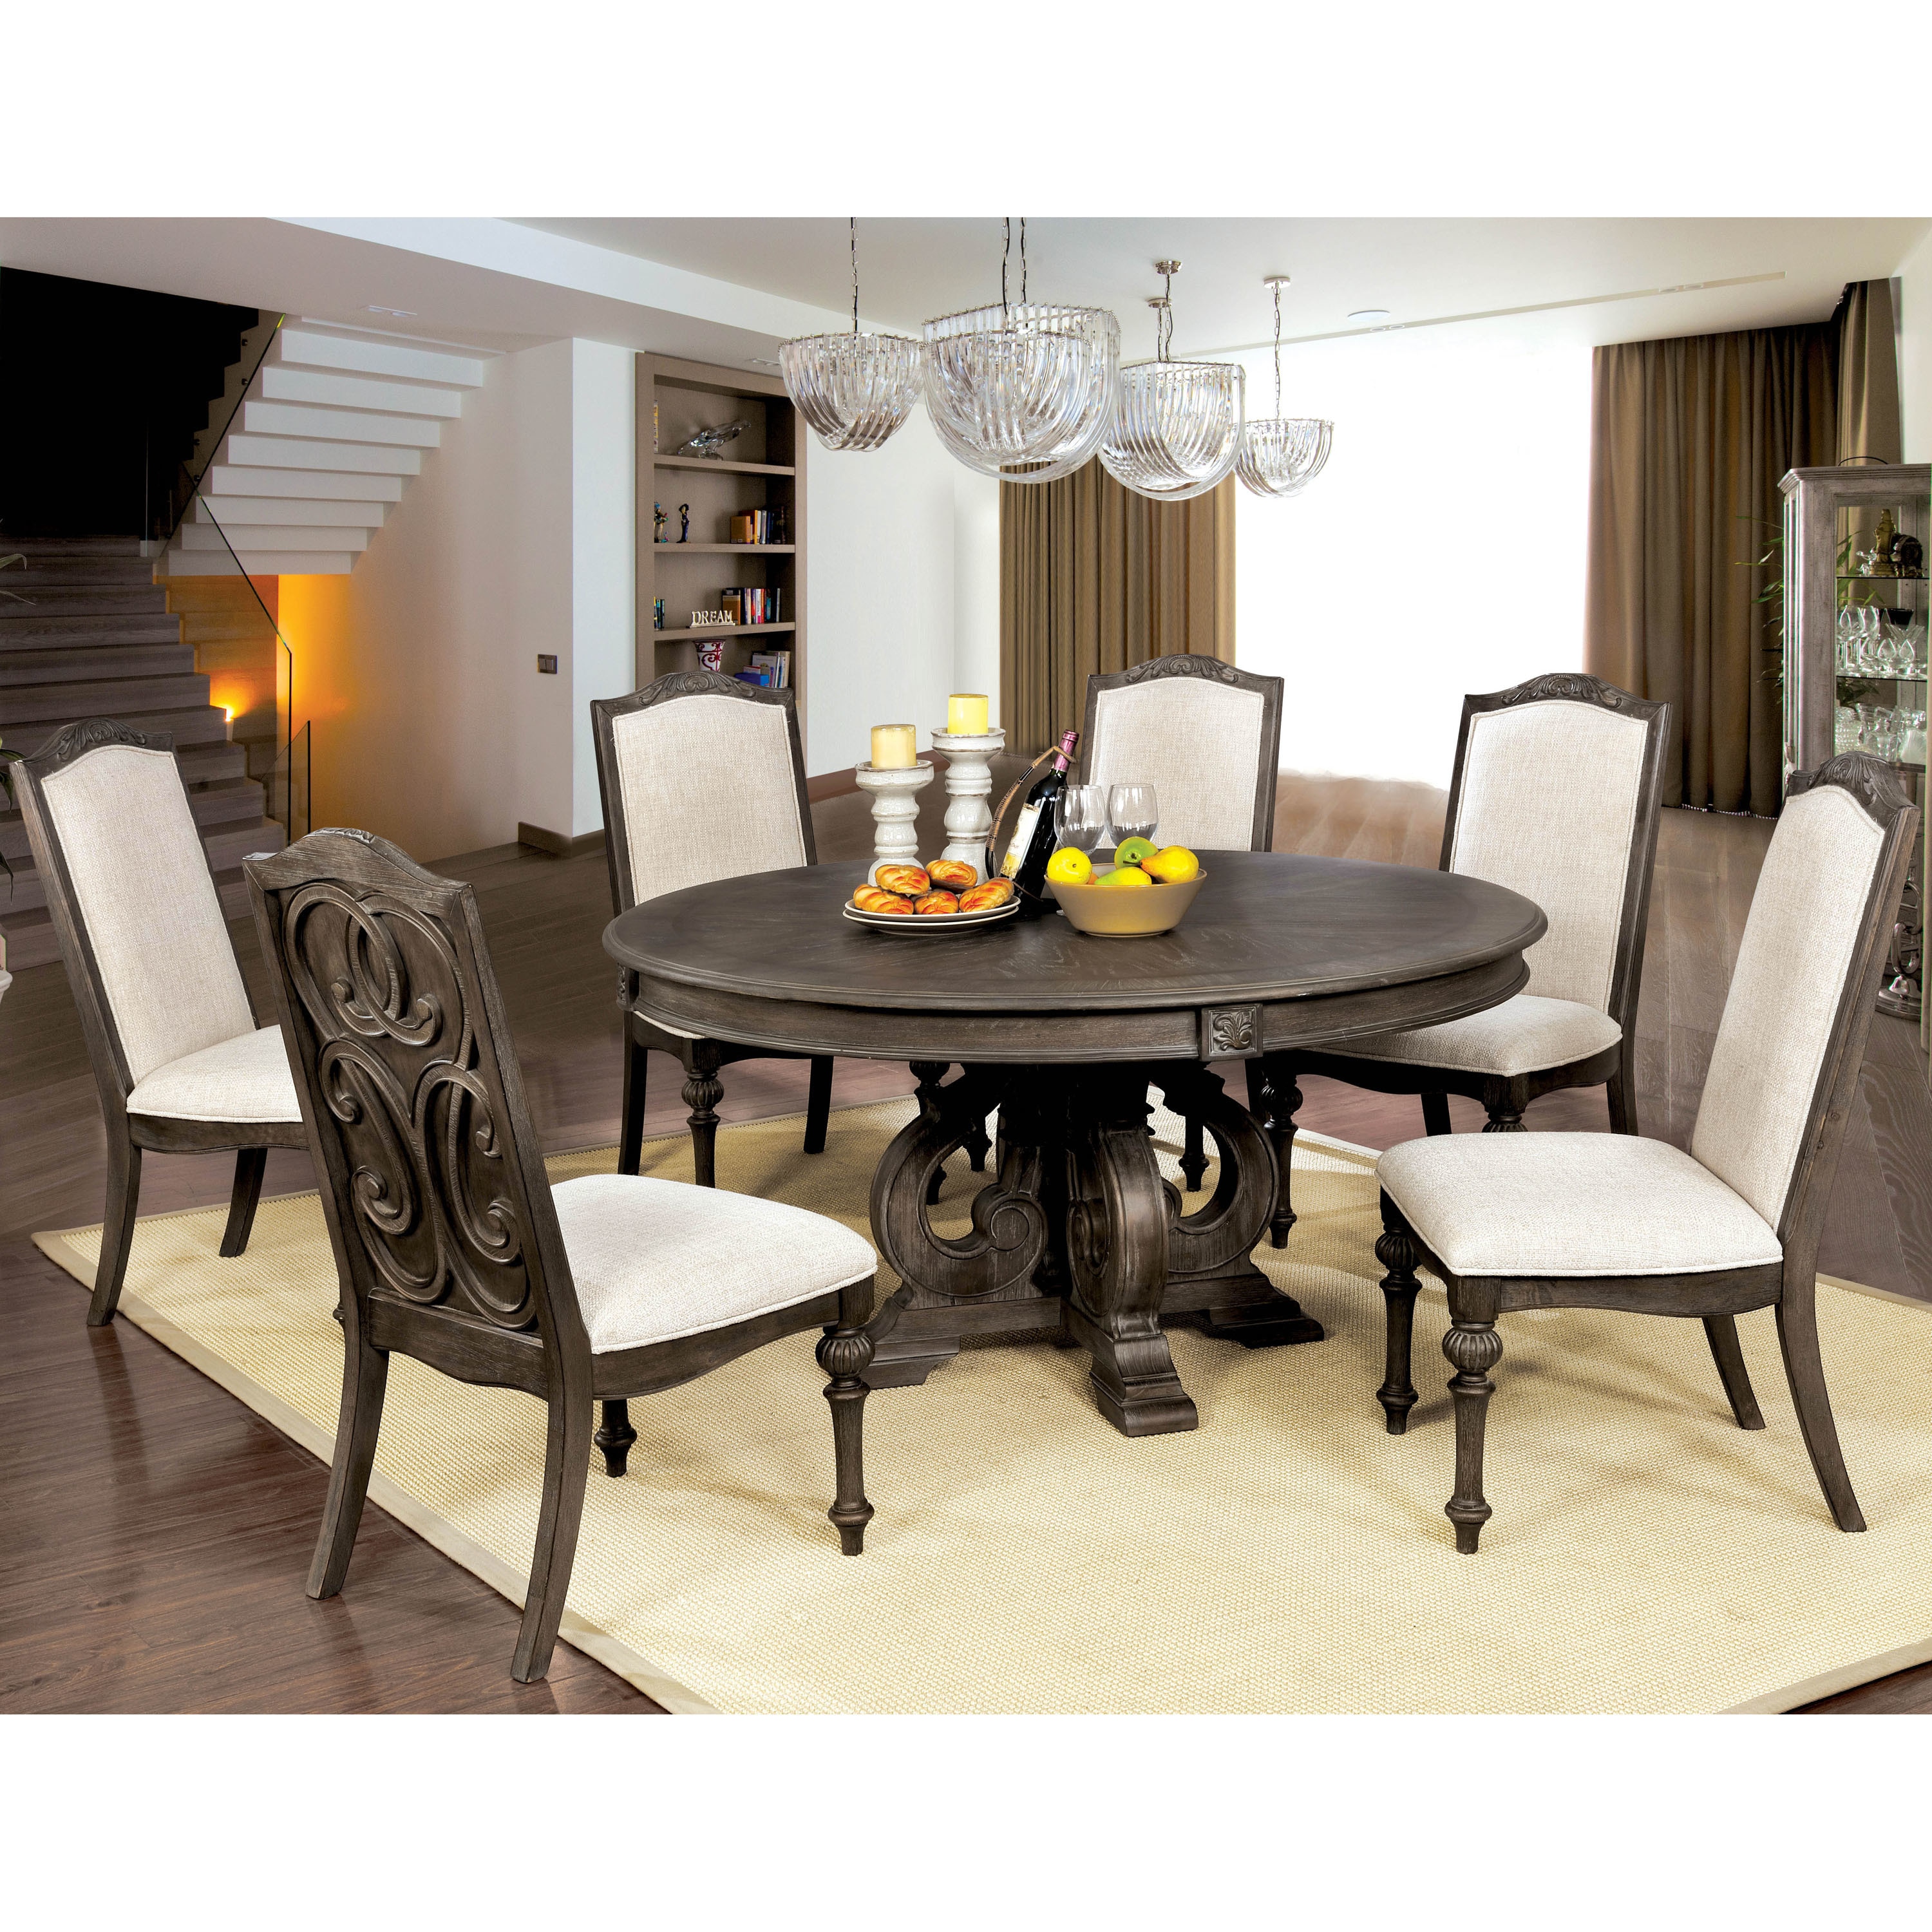 The Gray Barn New Lands Rustic Brown 60 Inch Round Dining Table On Sale Overstock 20911861